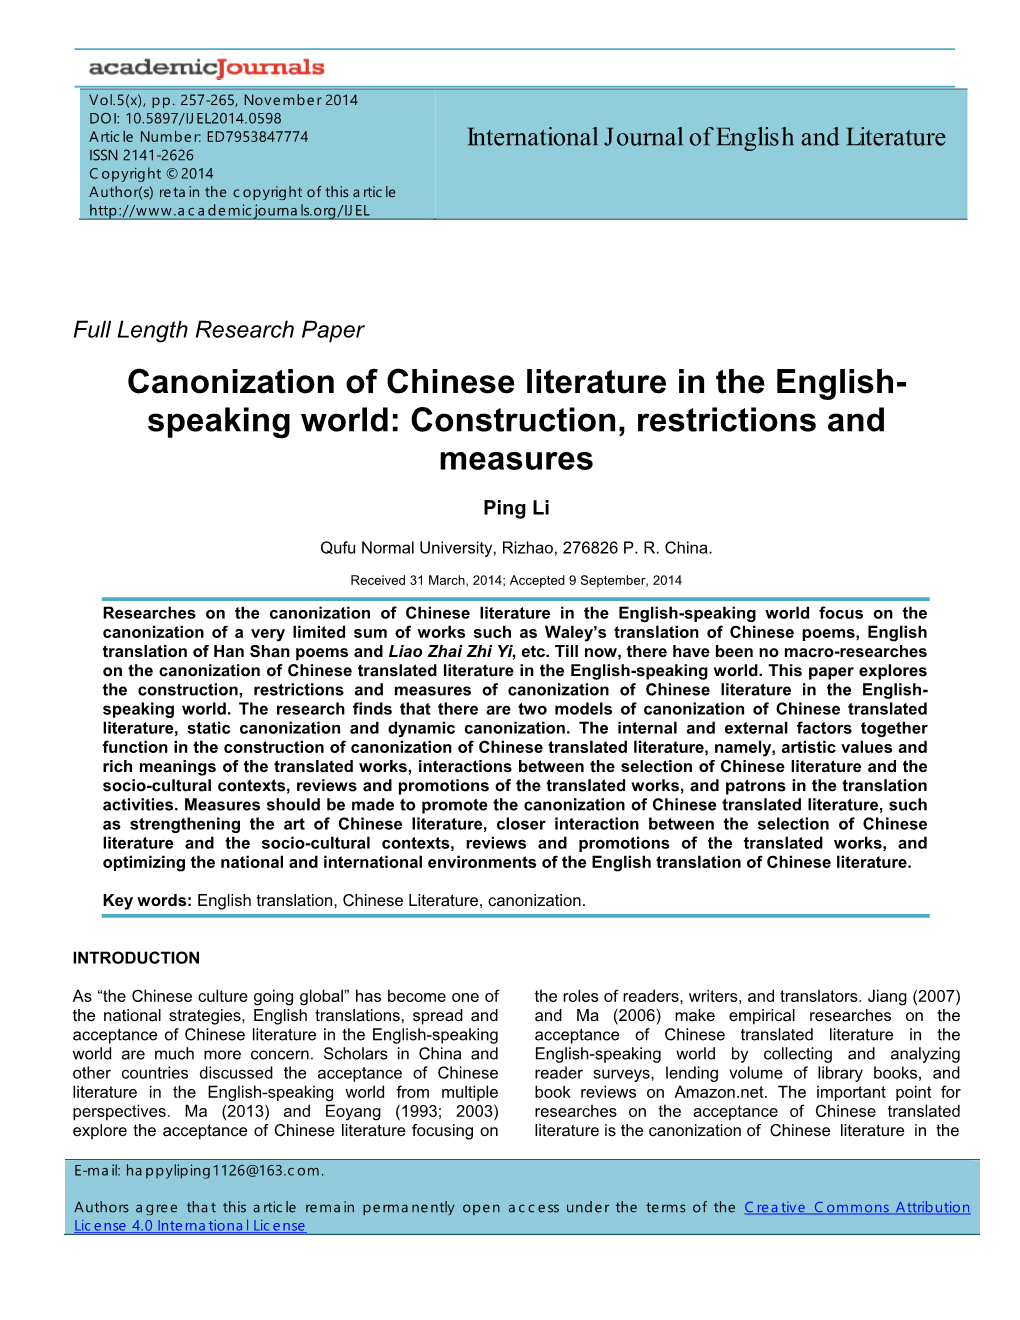 Canonization of Chinese Literature in the English- Speaking World: Construction, Restrictions and Measures